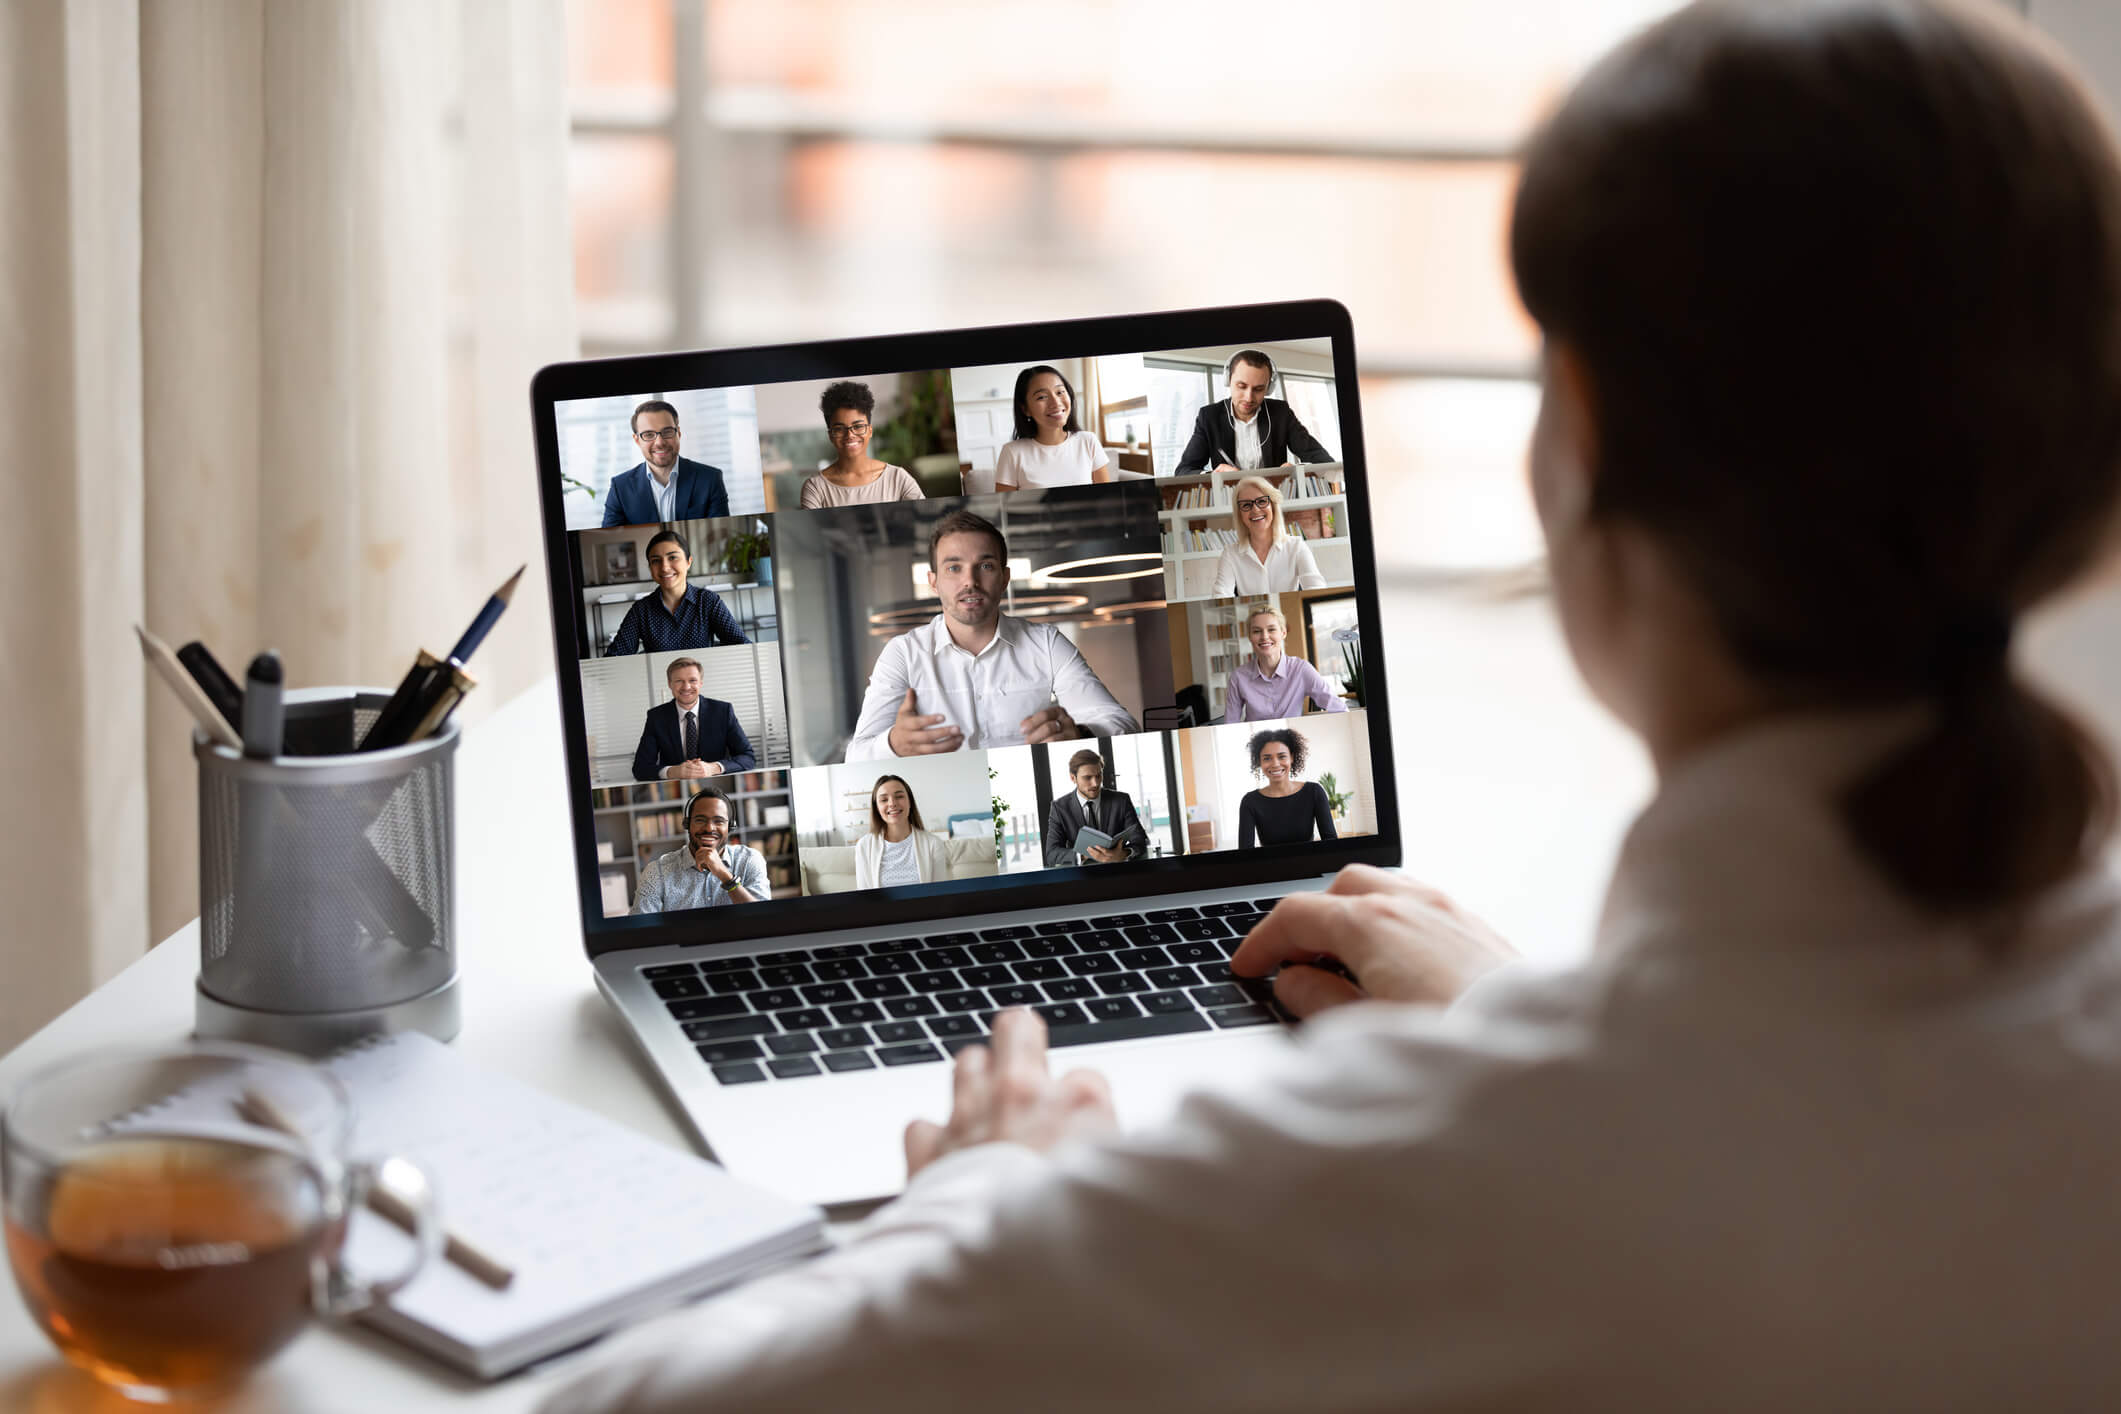 A person looking at a laptop screen, on which we can see a diverse group of people on a videoconference